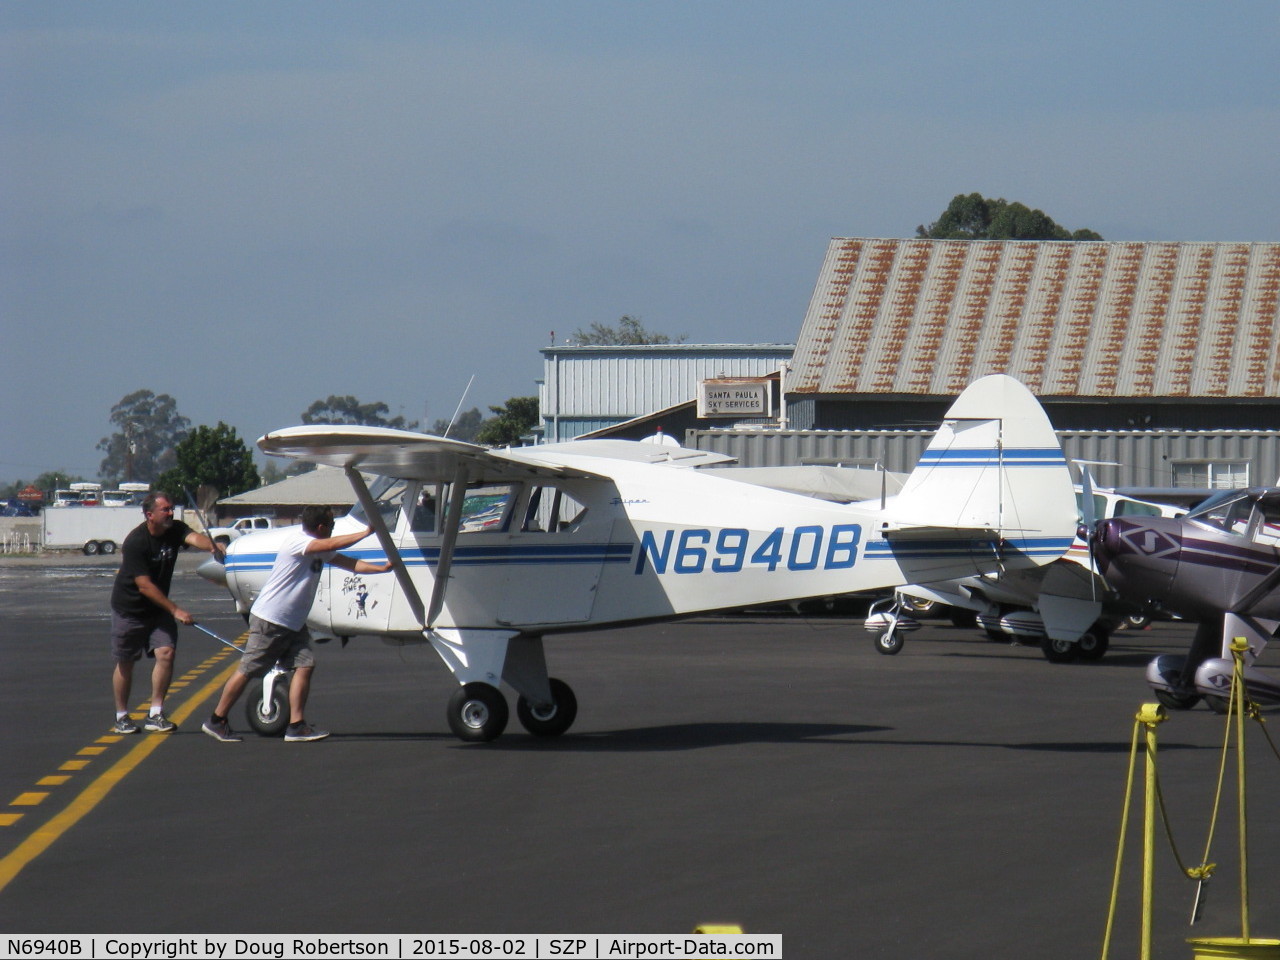 N6940B, 1956 Piper PA-22-150 Tri-Pacer C/N 22-4219, 1956 Piper PA-22 150 TRI-PACER, Lycoming O-320 150 Hp, spotting the aircraft on transient ramp